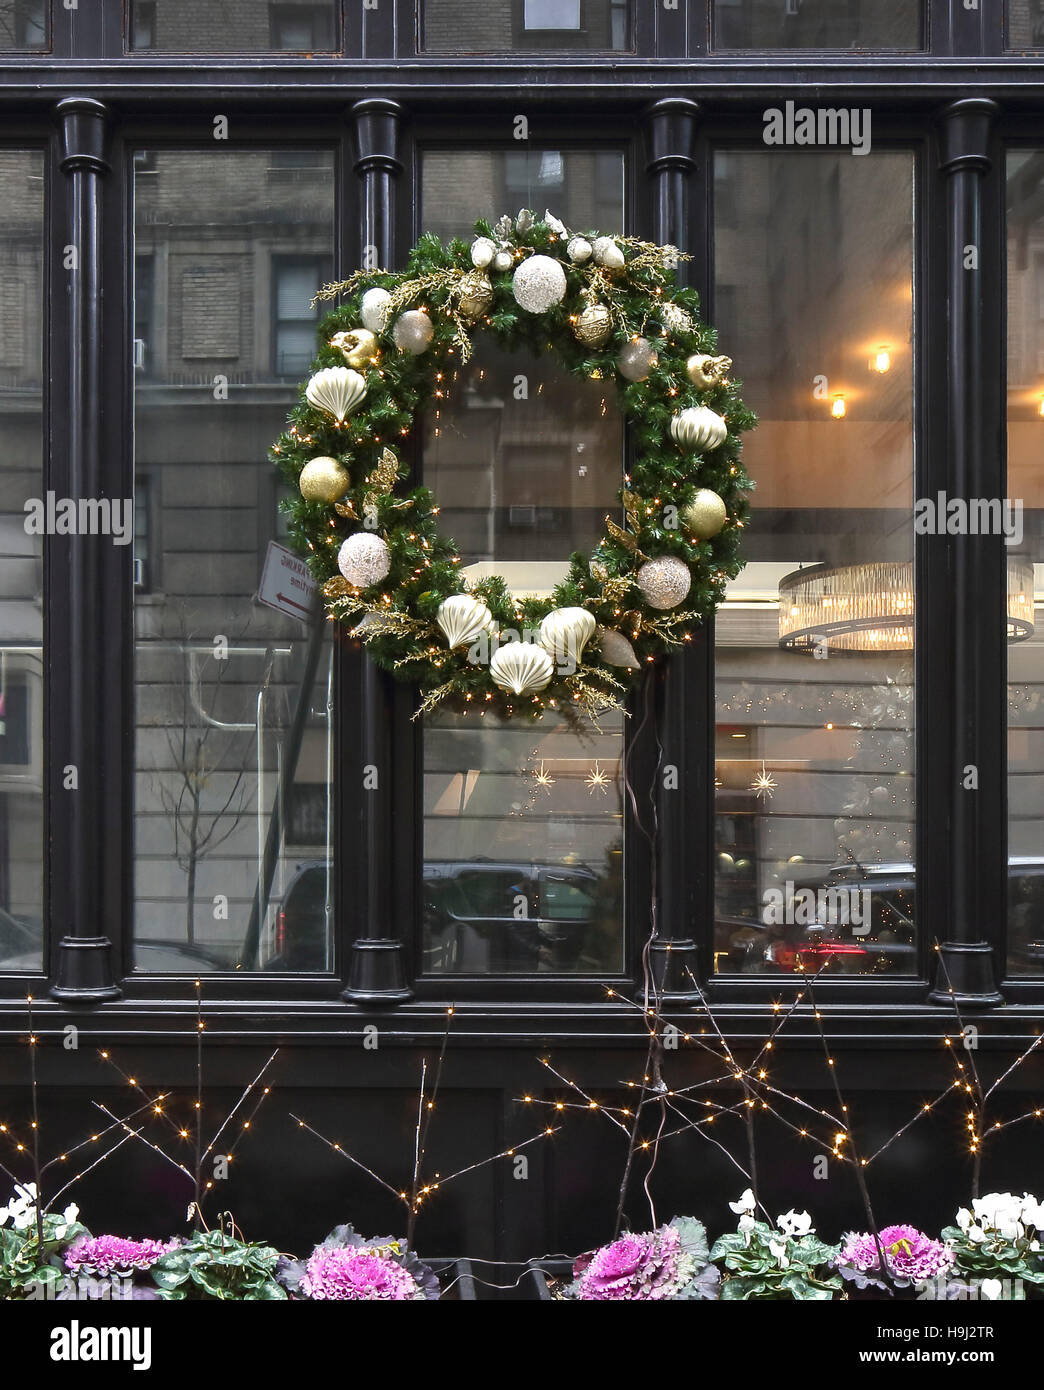 Detail of front facade of Hotel Belleclaire, 250 West 77th Street. Holiday Installations, NYC, United States. Architect: Barbra Scott Flowers, 2015. Stock Photo